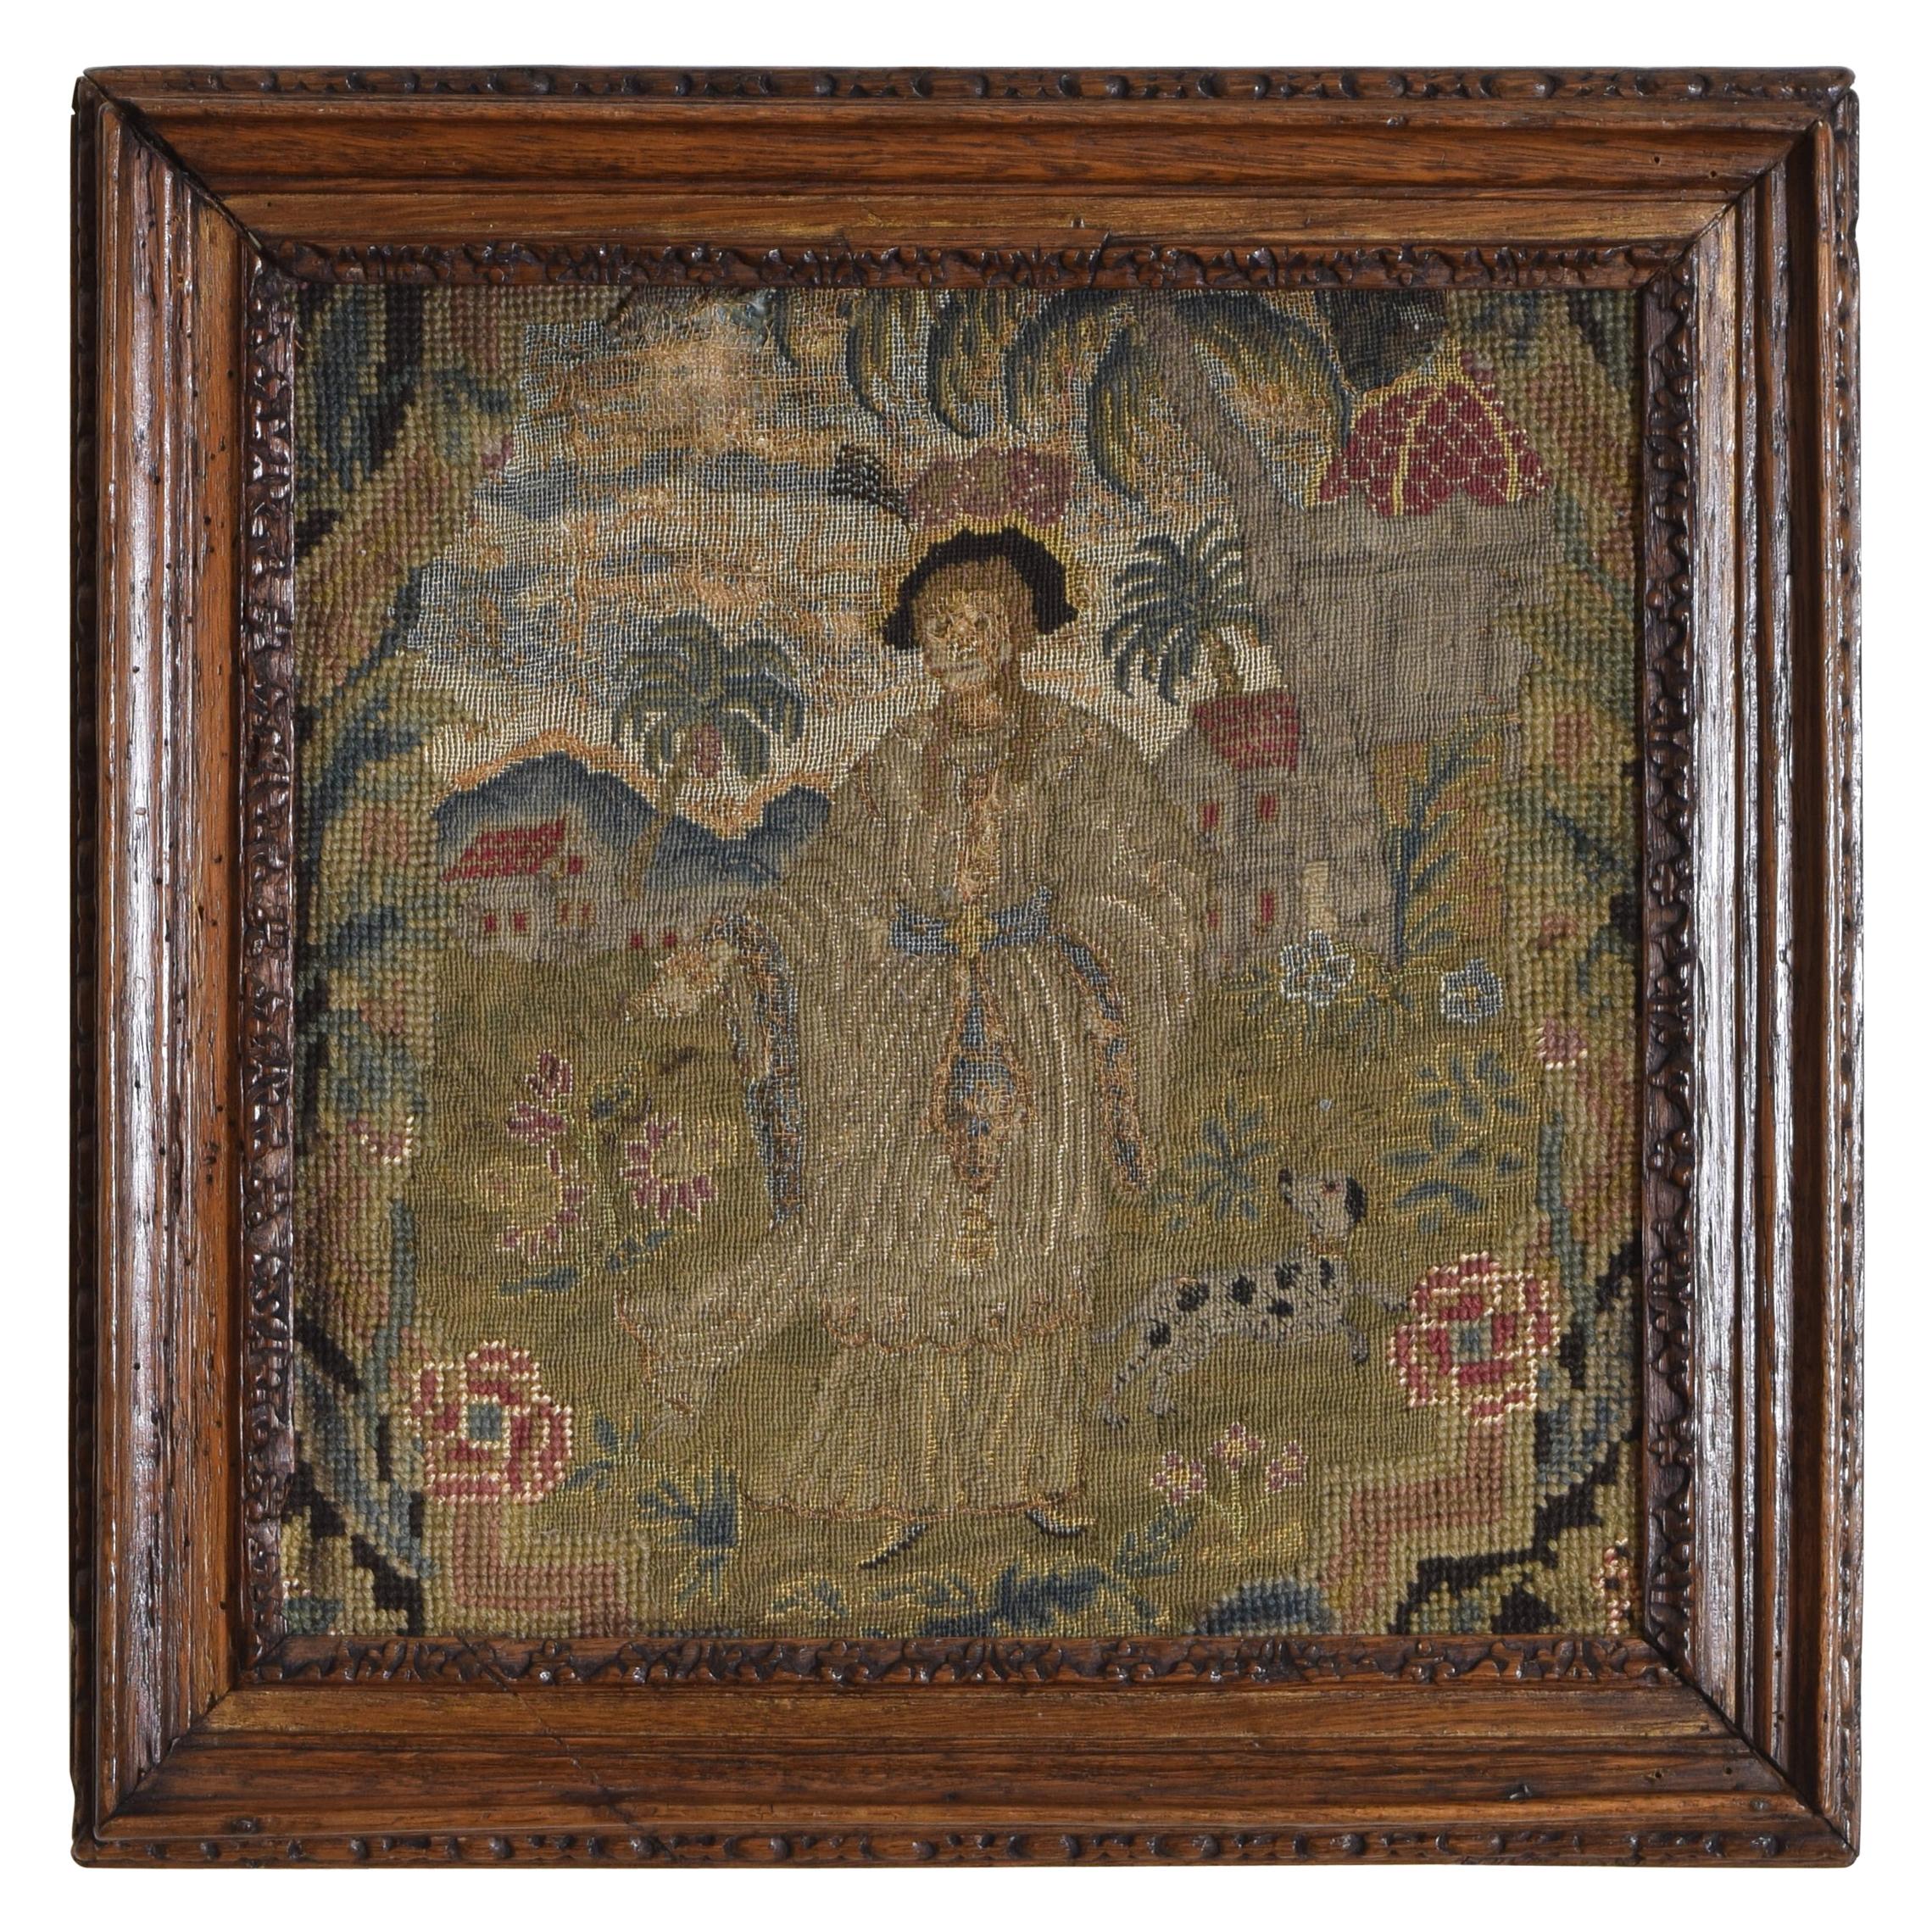 Conintental Frame Tapestry Fragement, Early 18th Century